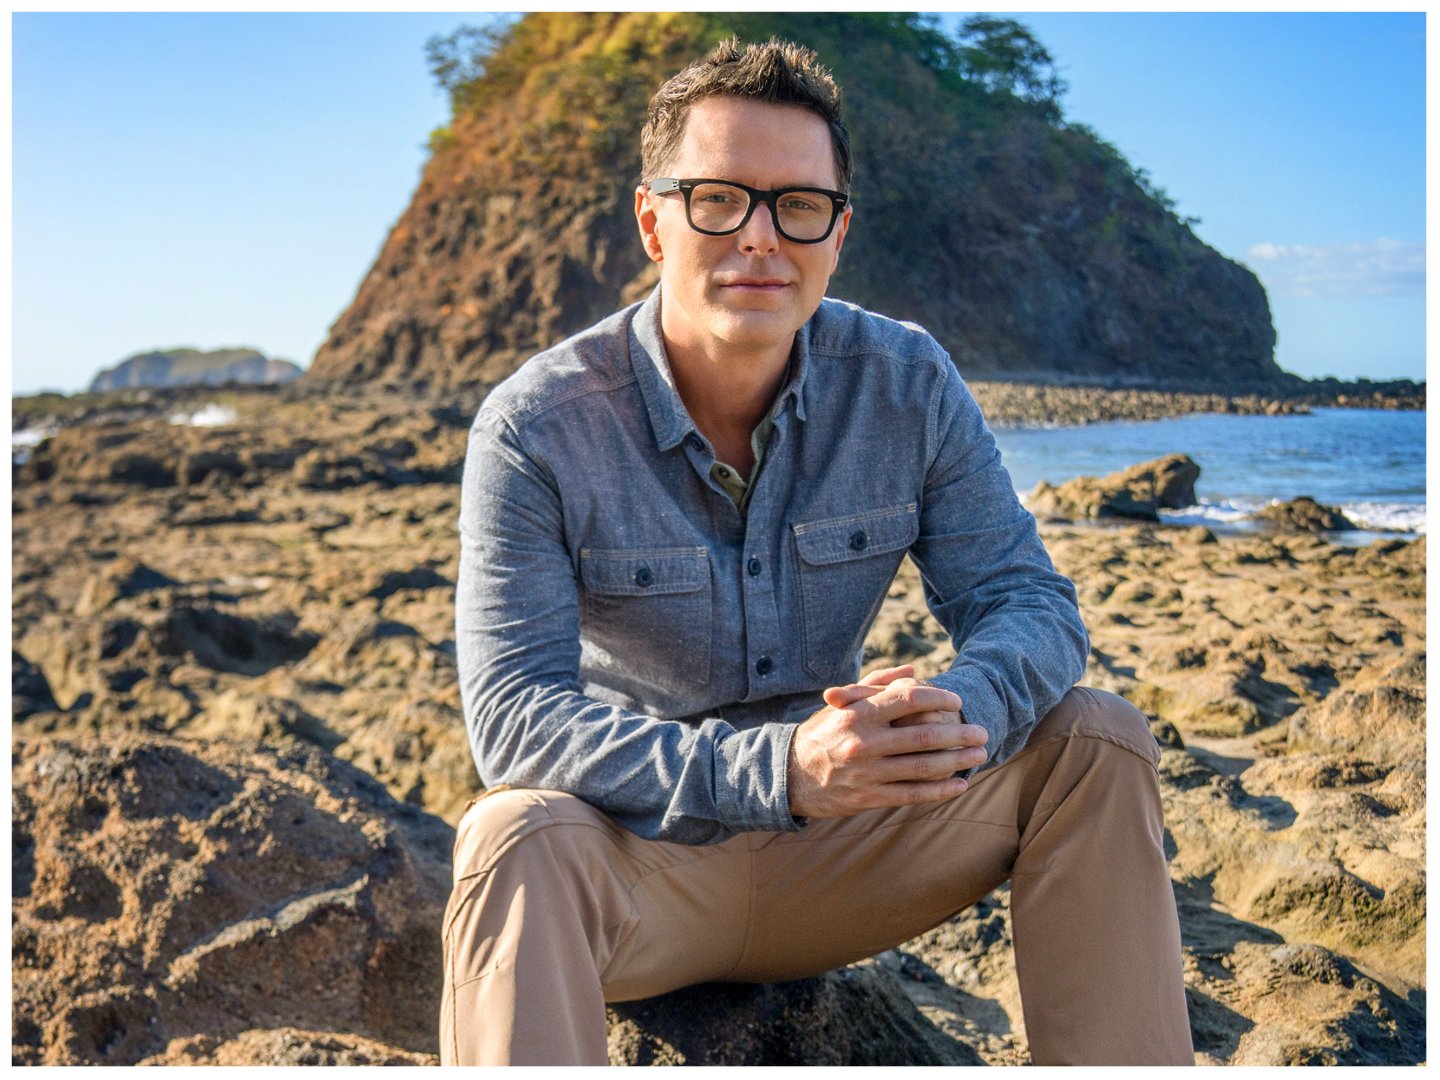 Bobby Bones from 'Snake in the Grass' sits on a rock with hands folded